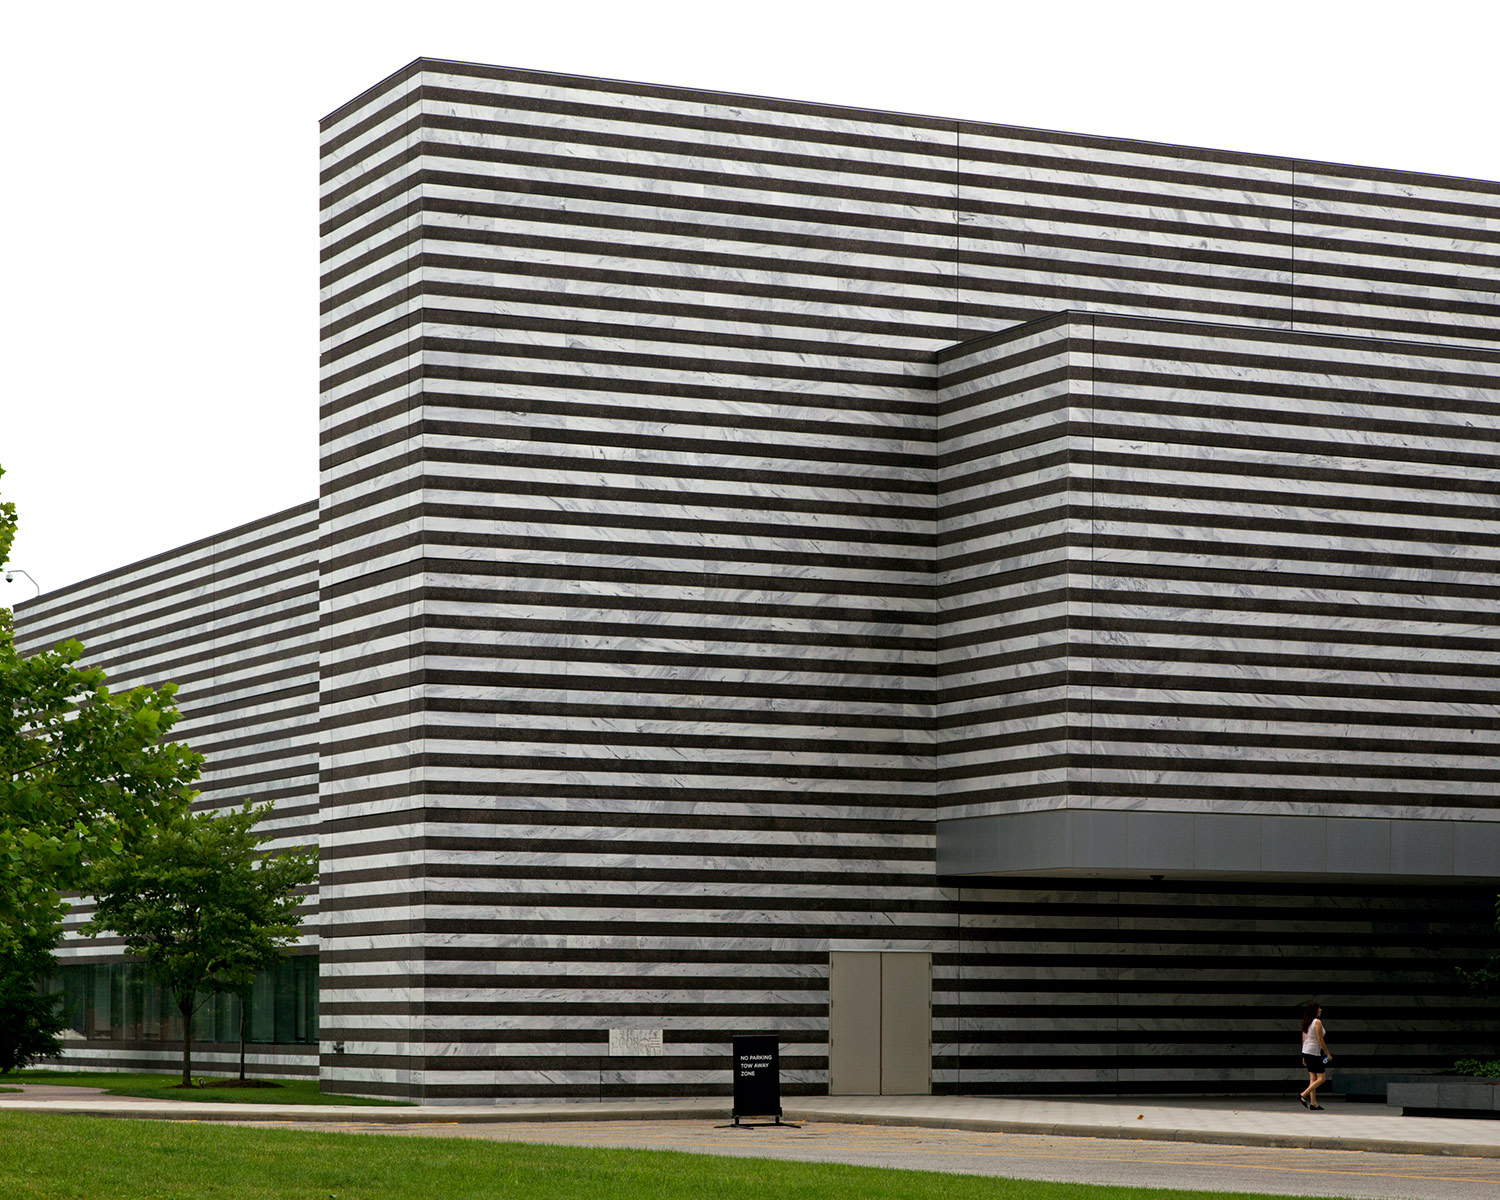 20140803. The Cleveland Museum of Art's banded Brutalism; a stri